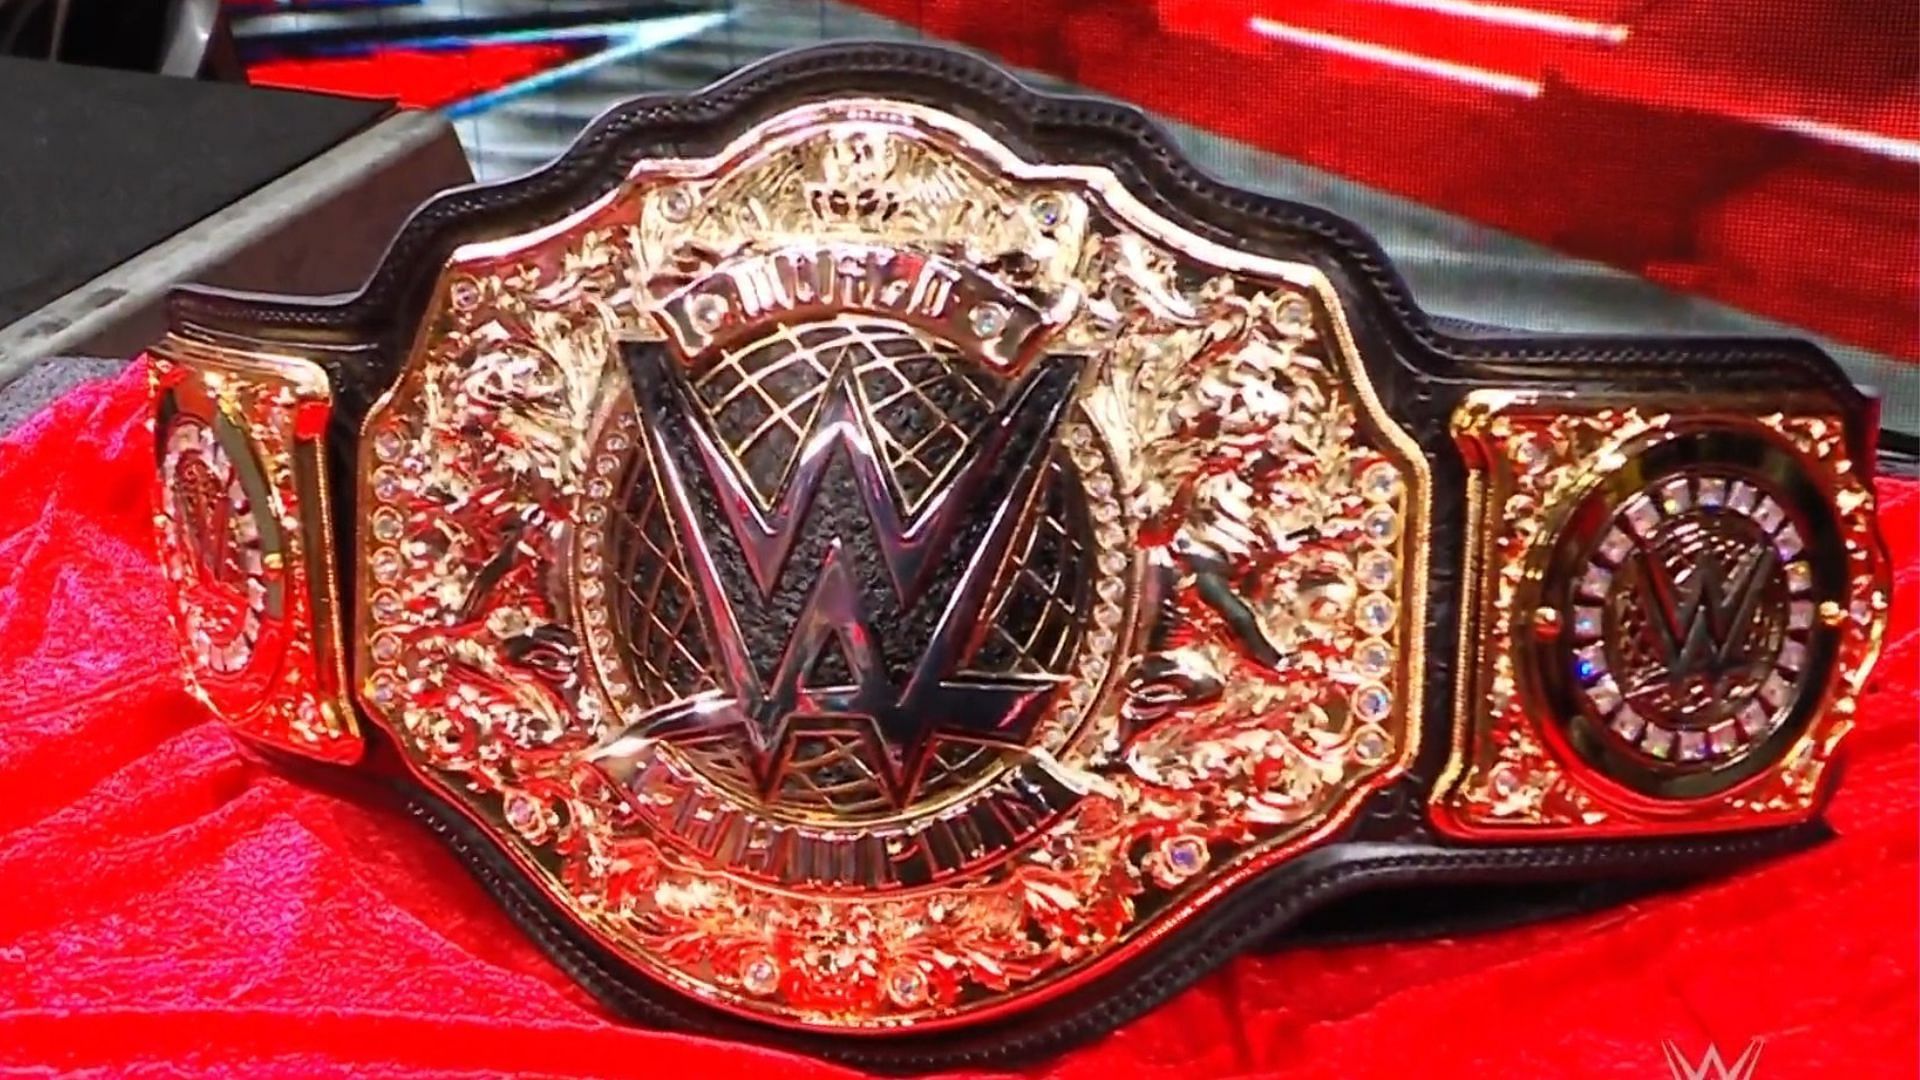 The World Heavyweight Championship is back!